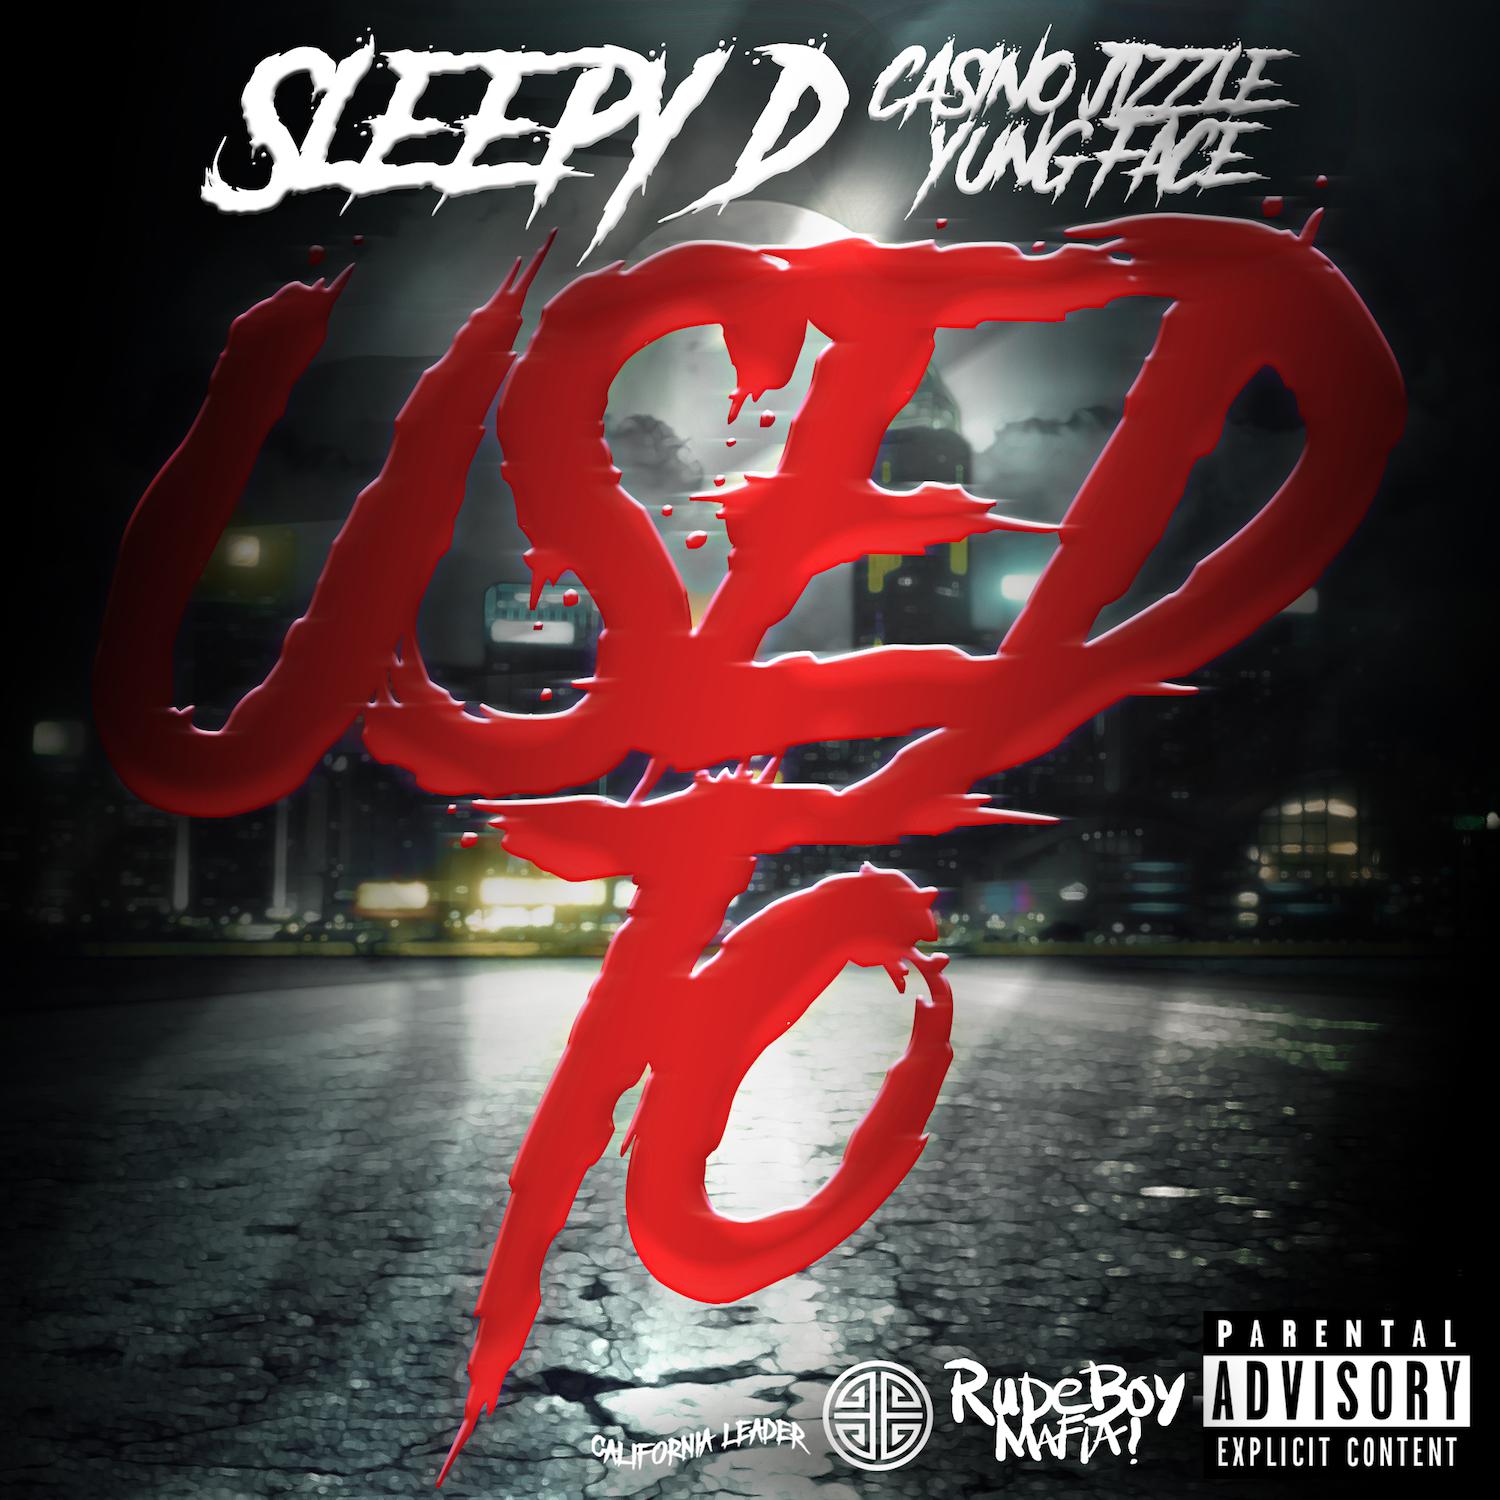 Used To (feat. Casino Jizzle & Yung Face)